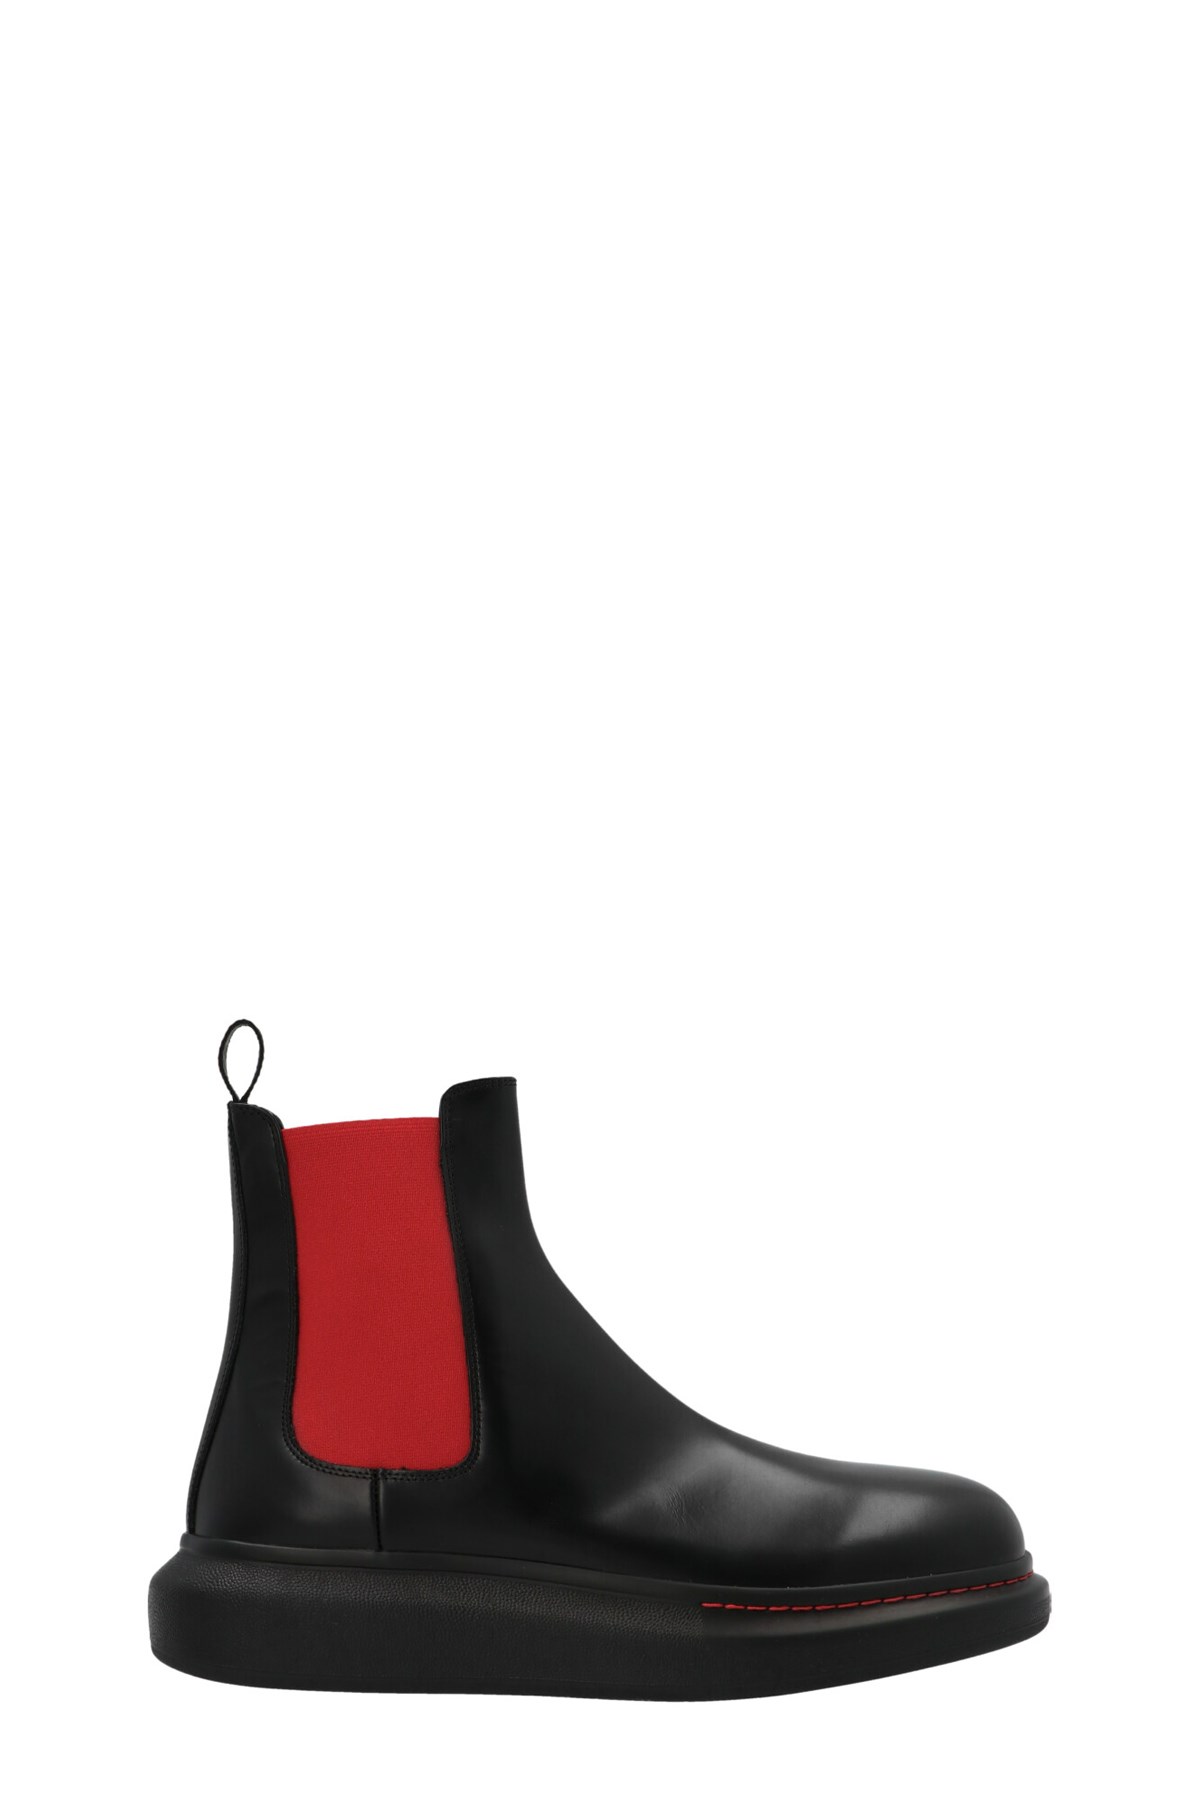 ALEXANDER MCQUEEN 'Oversize Sole’ Ankle Boots